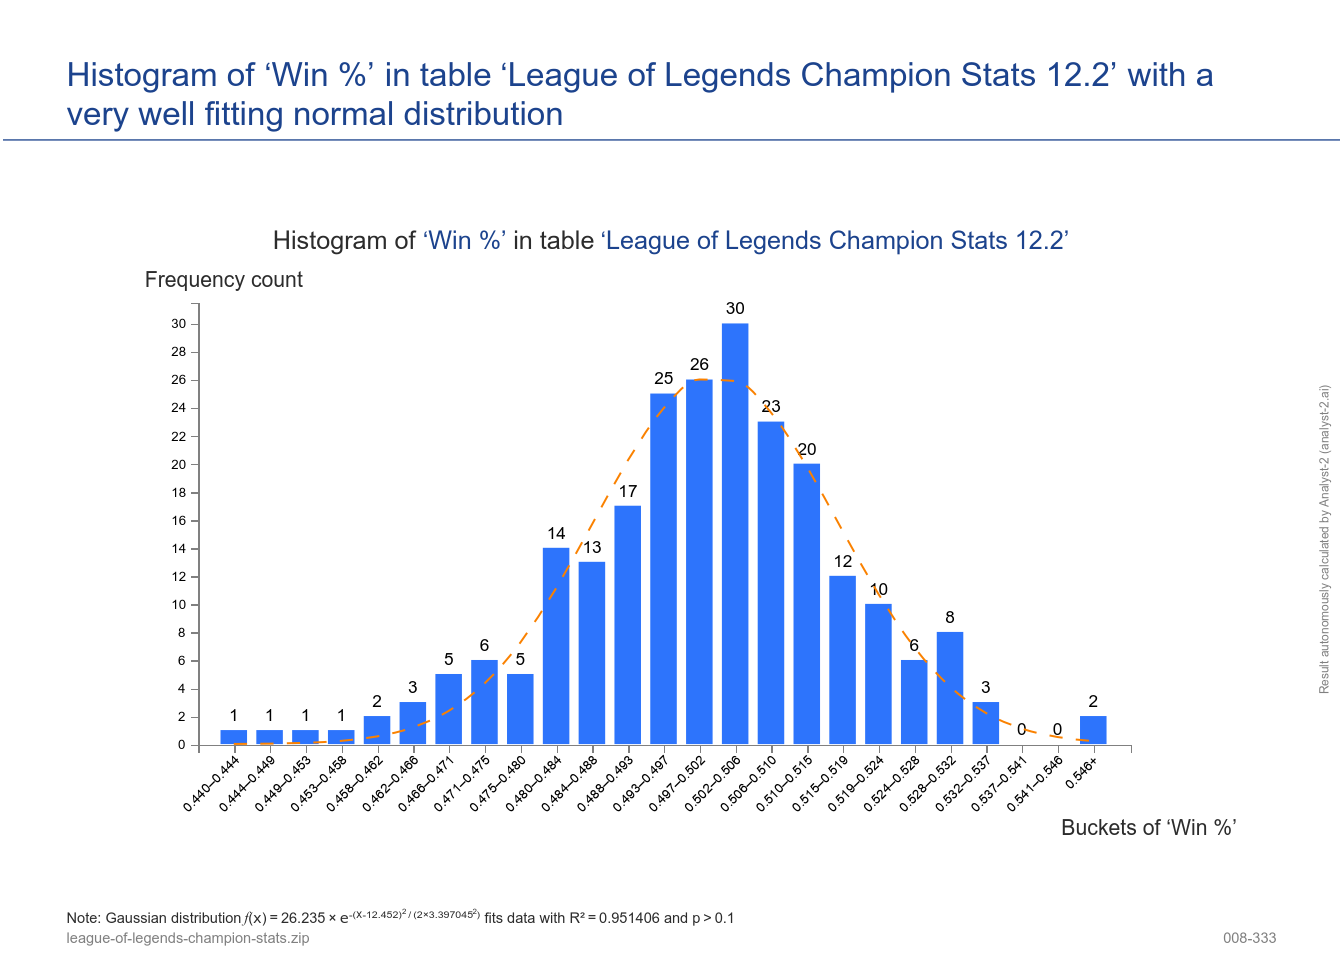 I made a distribution graph of champions winrate by role for the